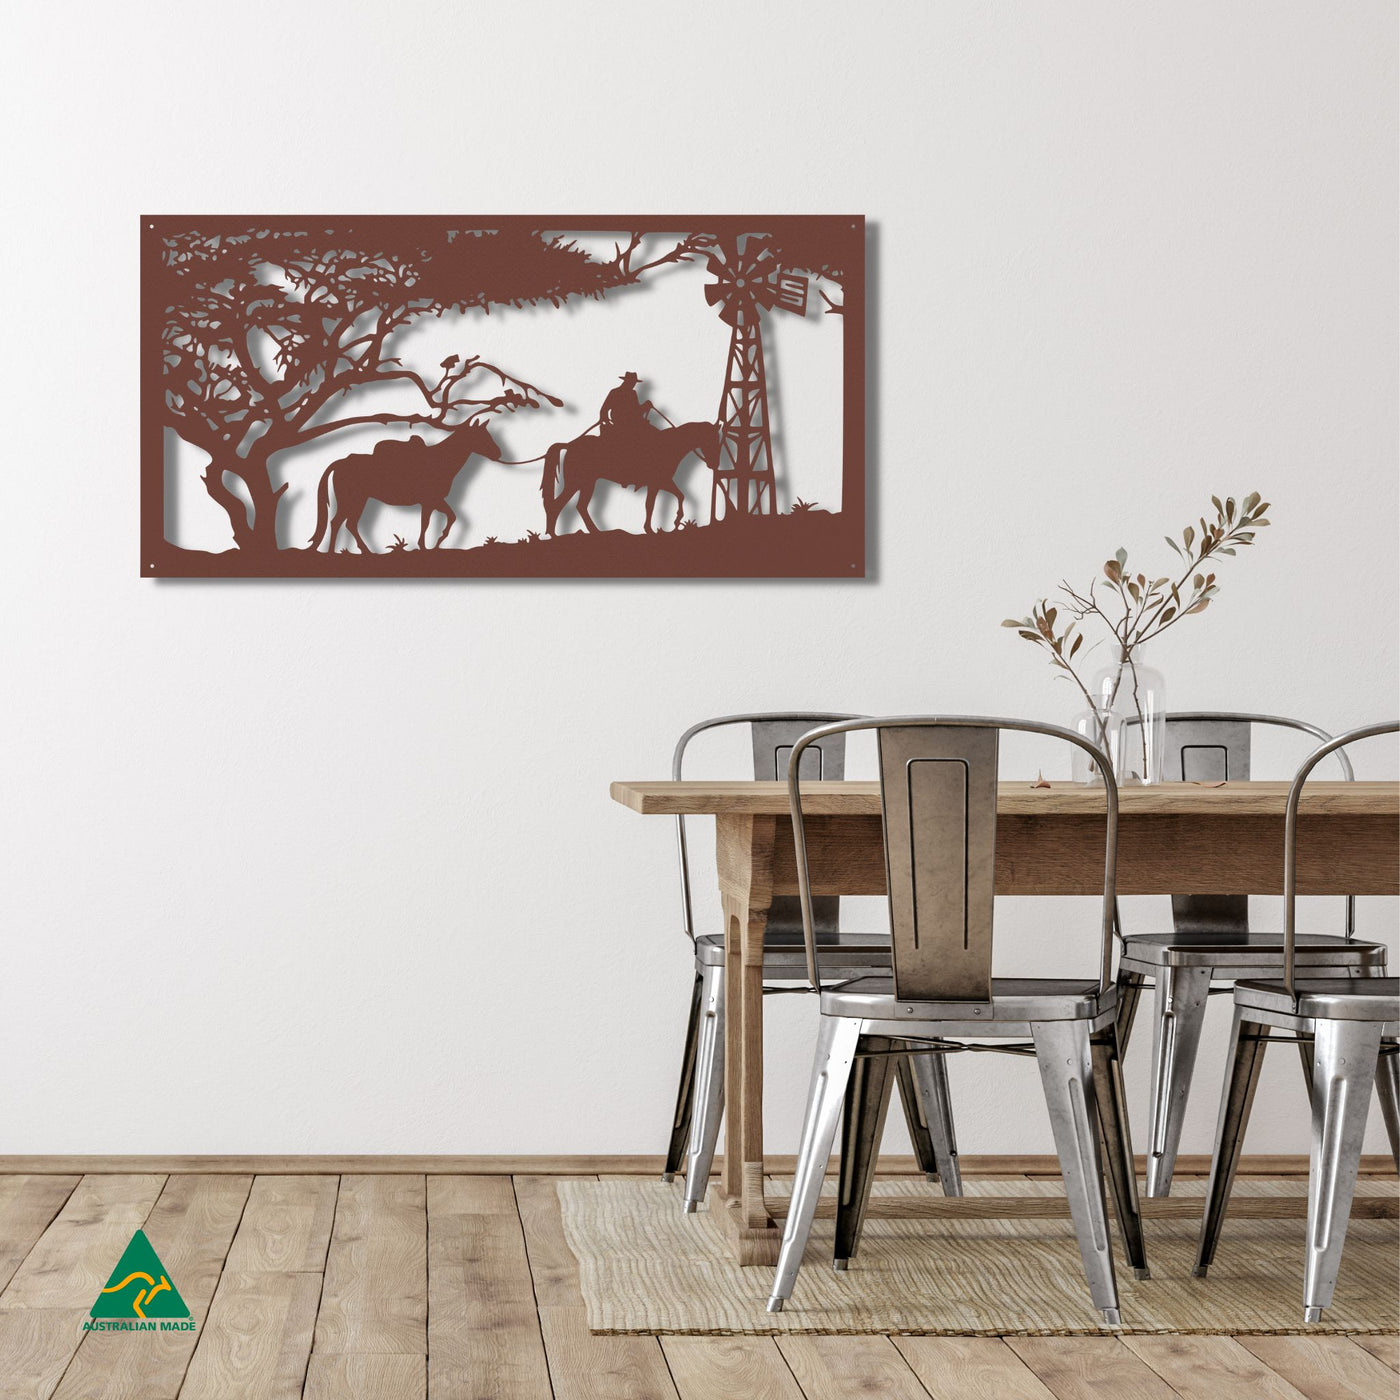 Horse Riding Scene Metal Wall Art Staged Image | Rust Patina